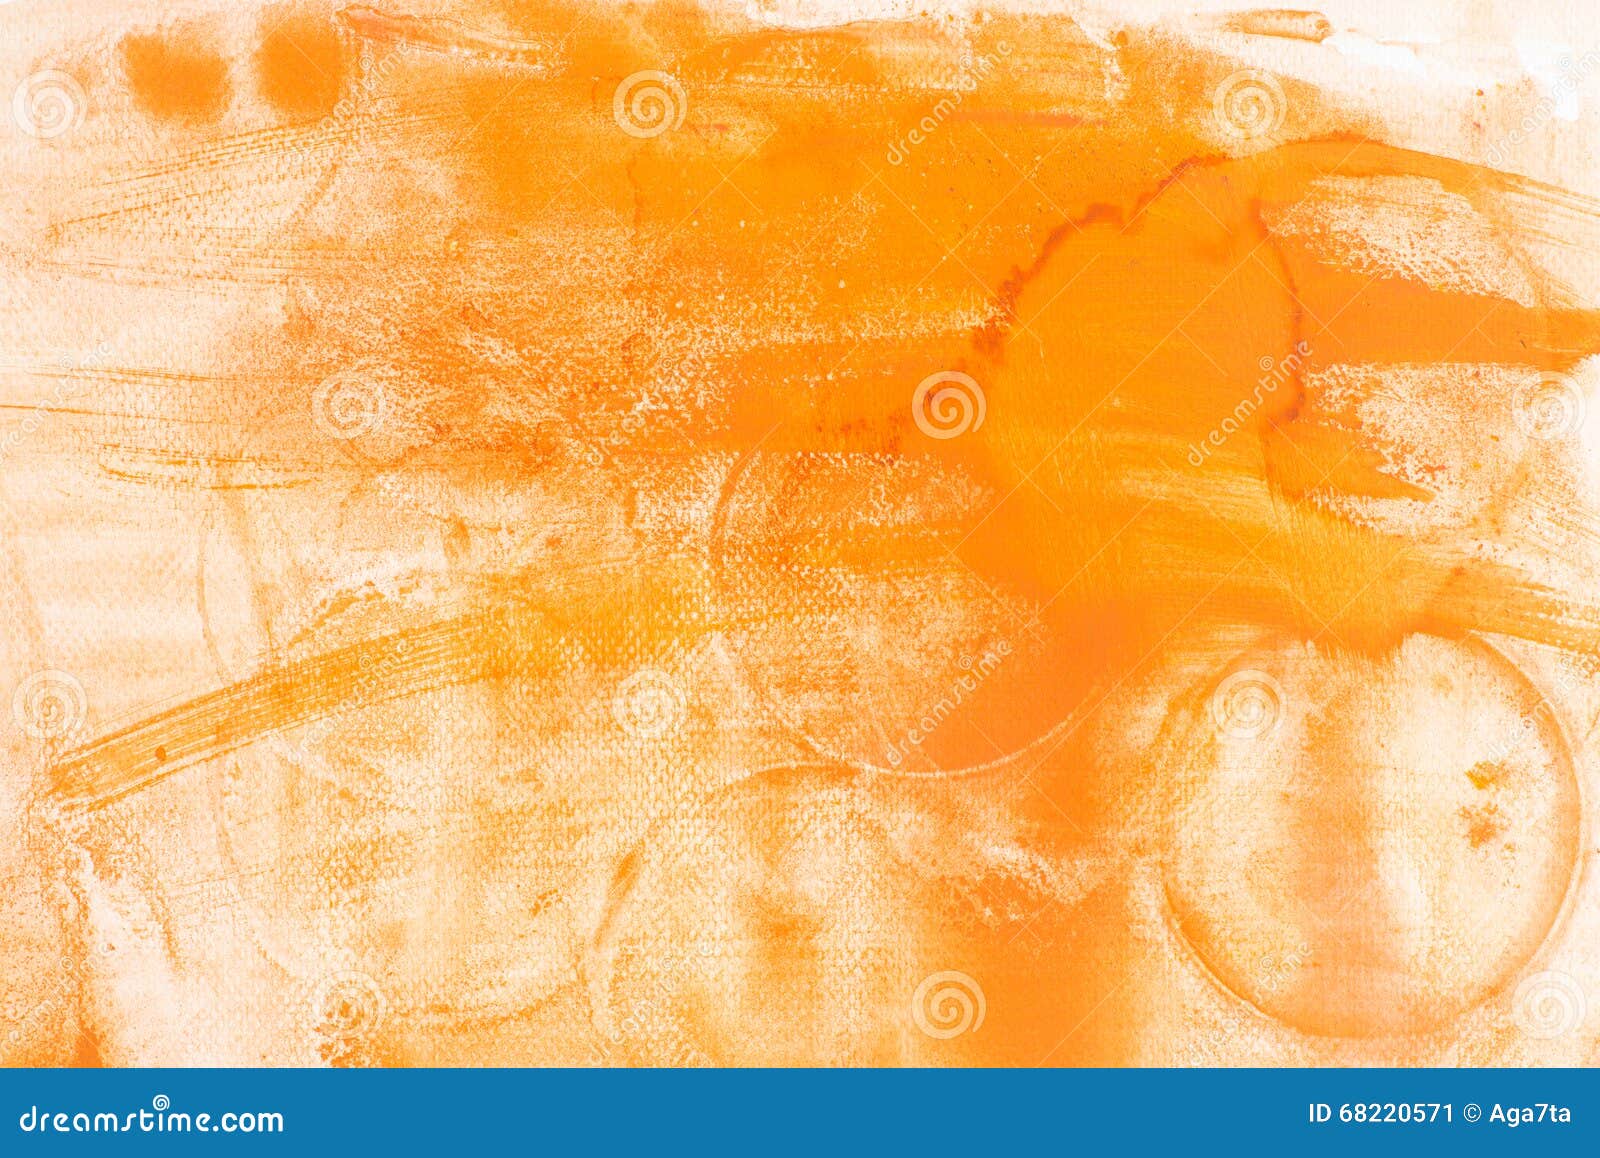 Watercolor Orange Painted Background Stock Image - Image of light ...